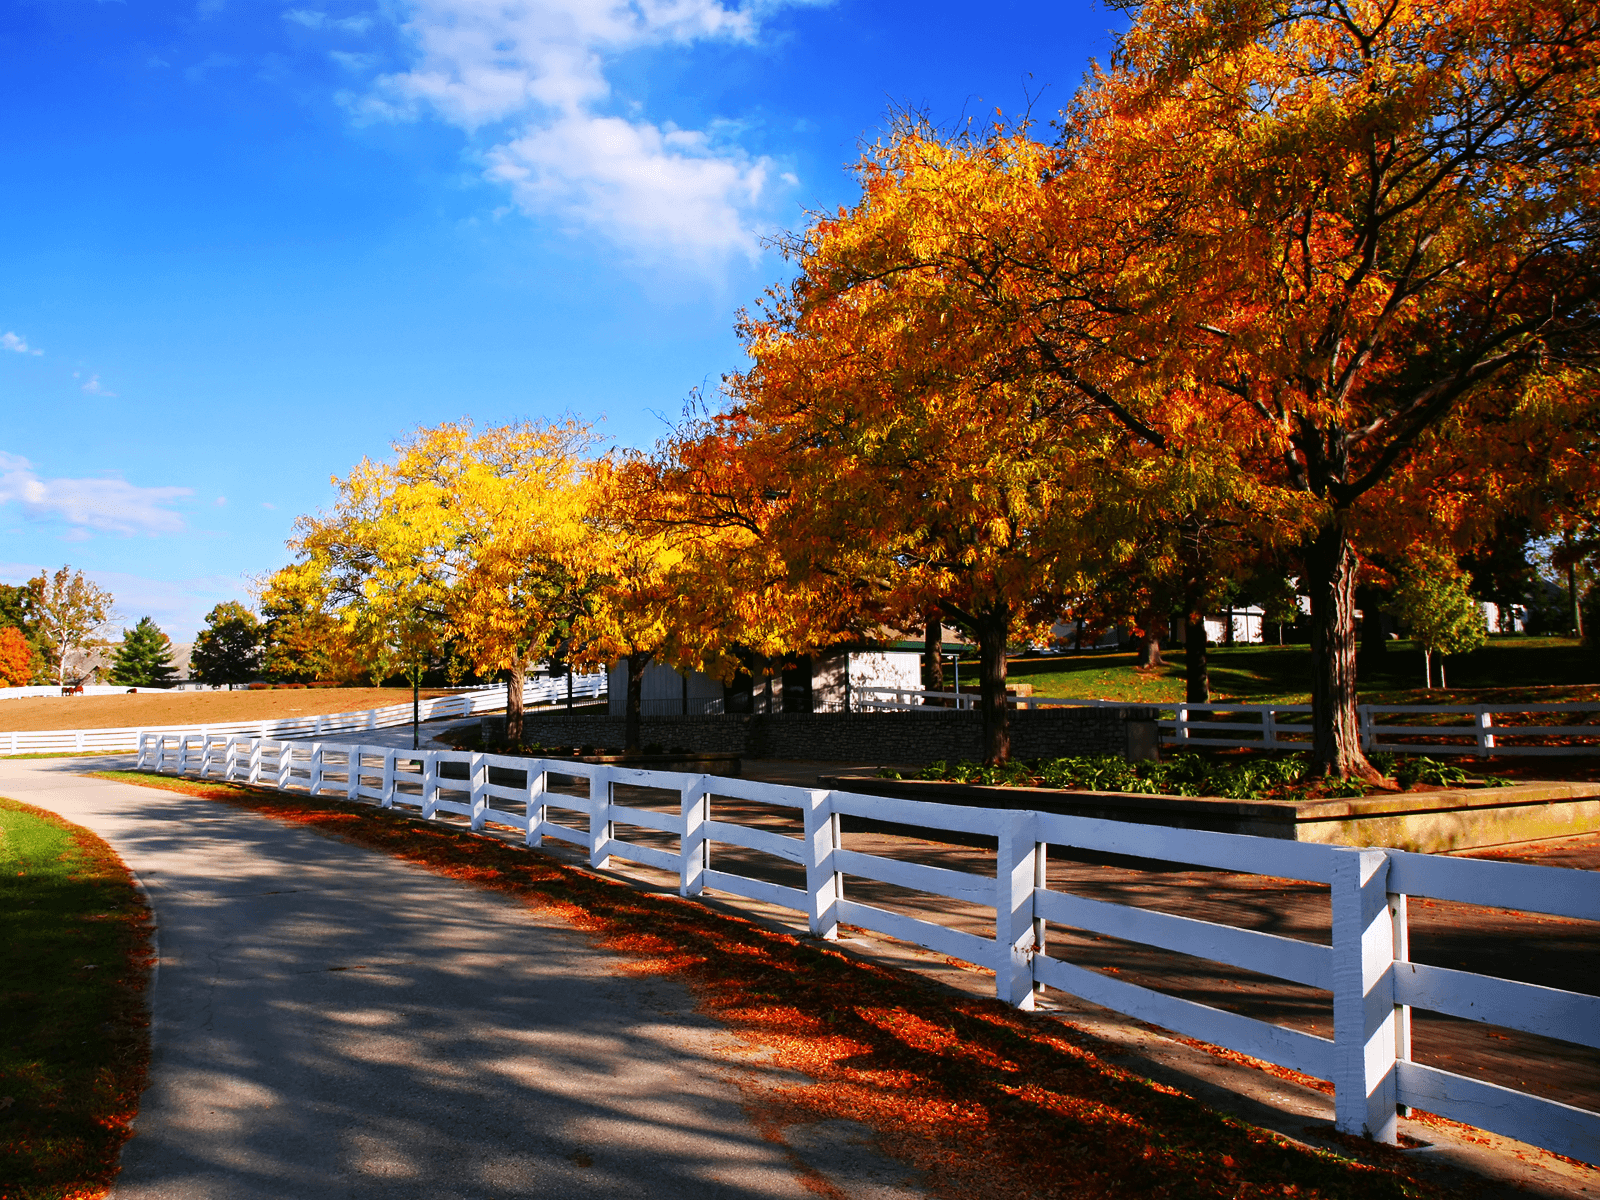 Horse Farm Autumn wallpaper. This Year's Election is About